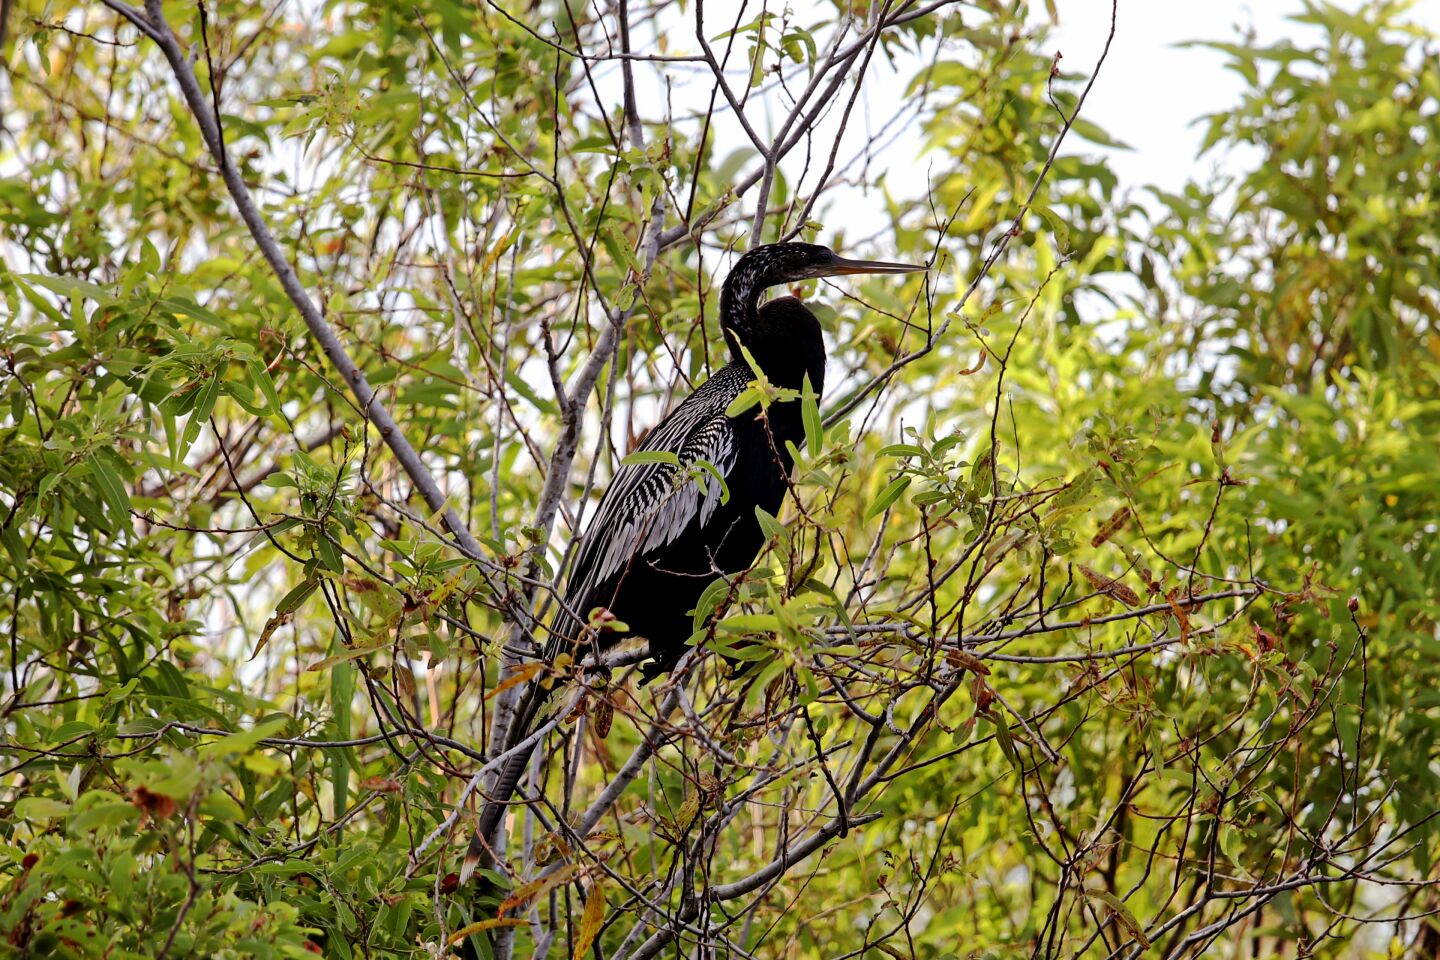 A large black bird in a tree